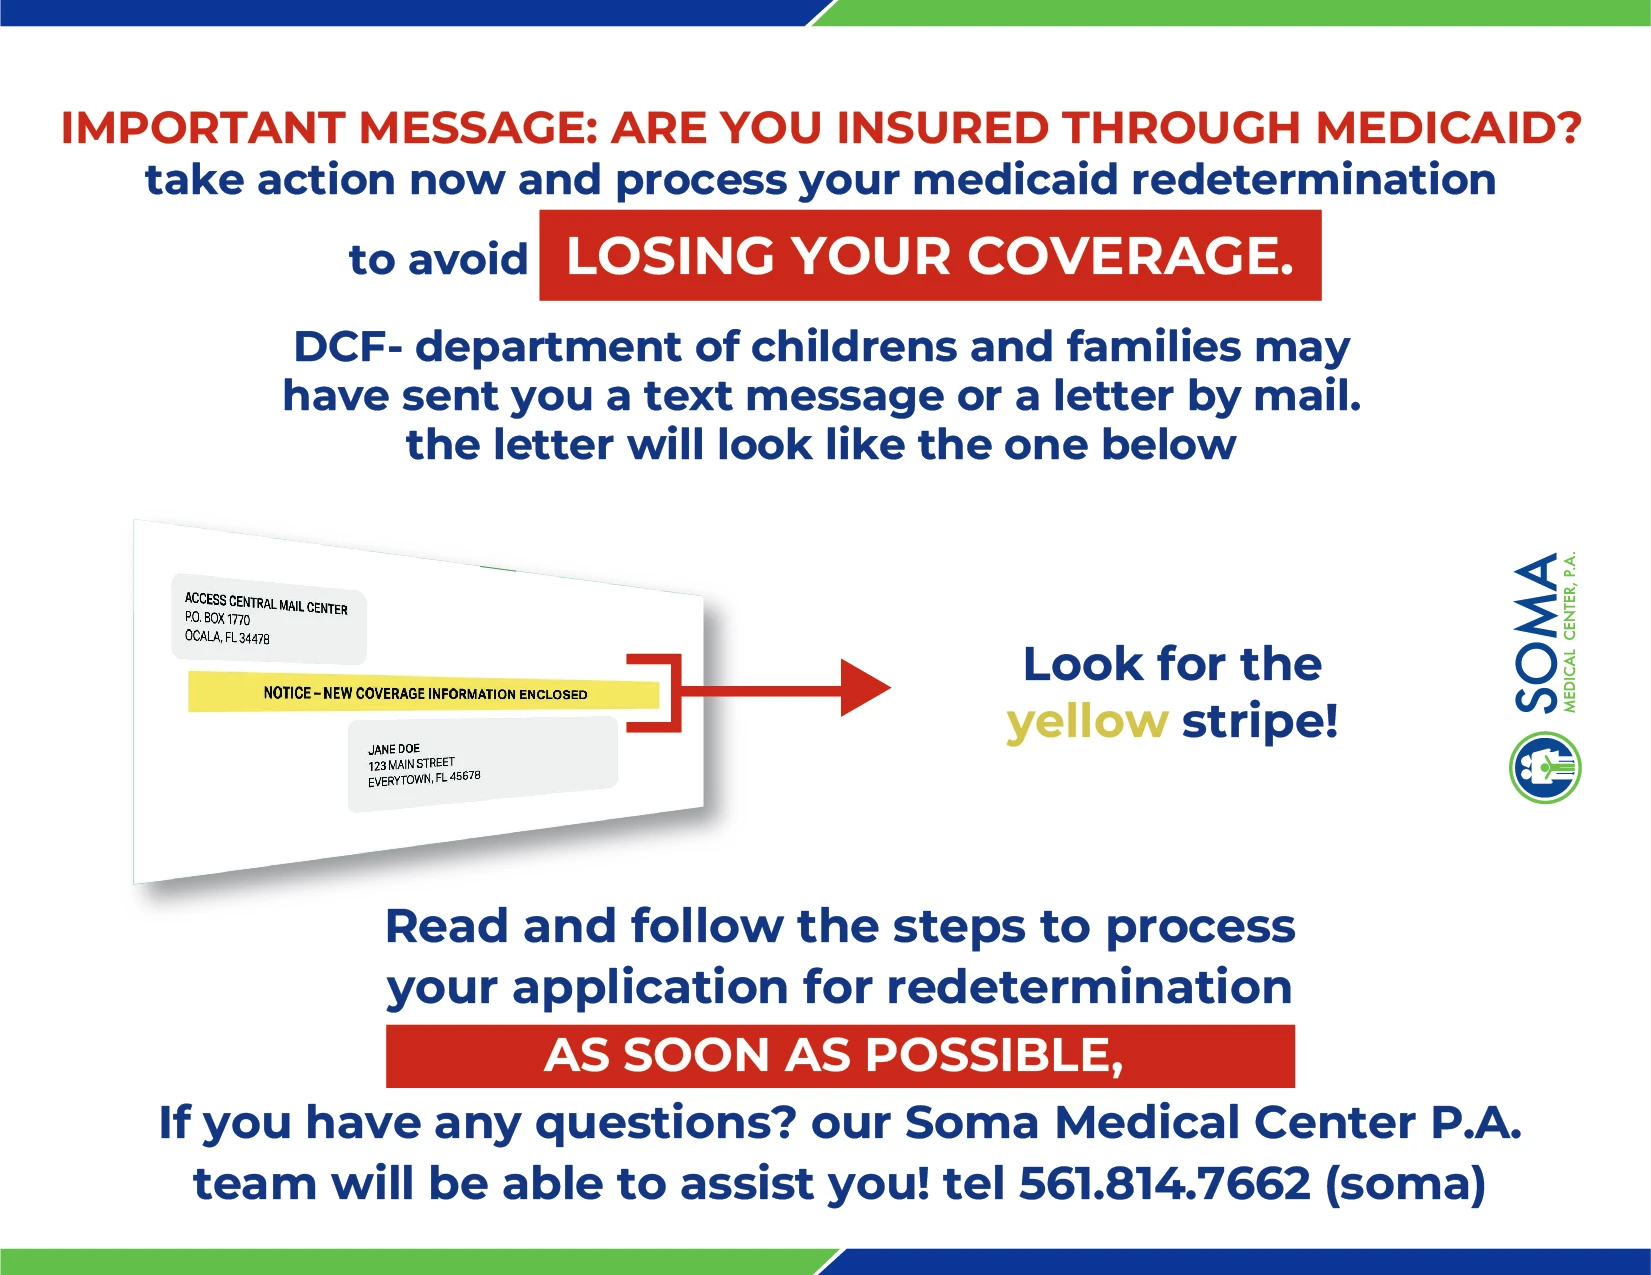 Important message: Are you insured through medicaid?